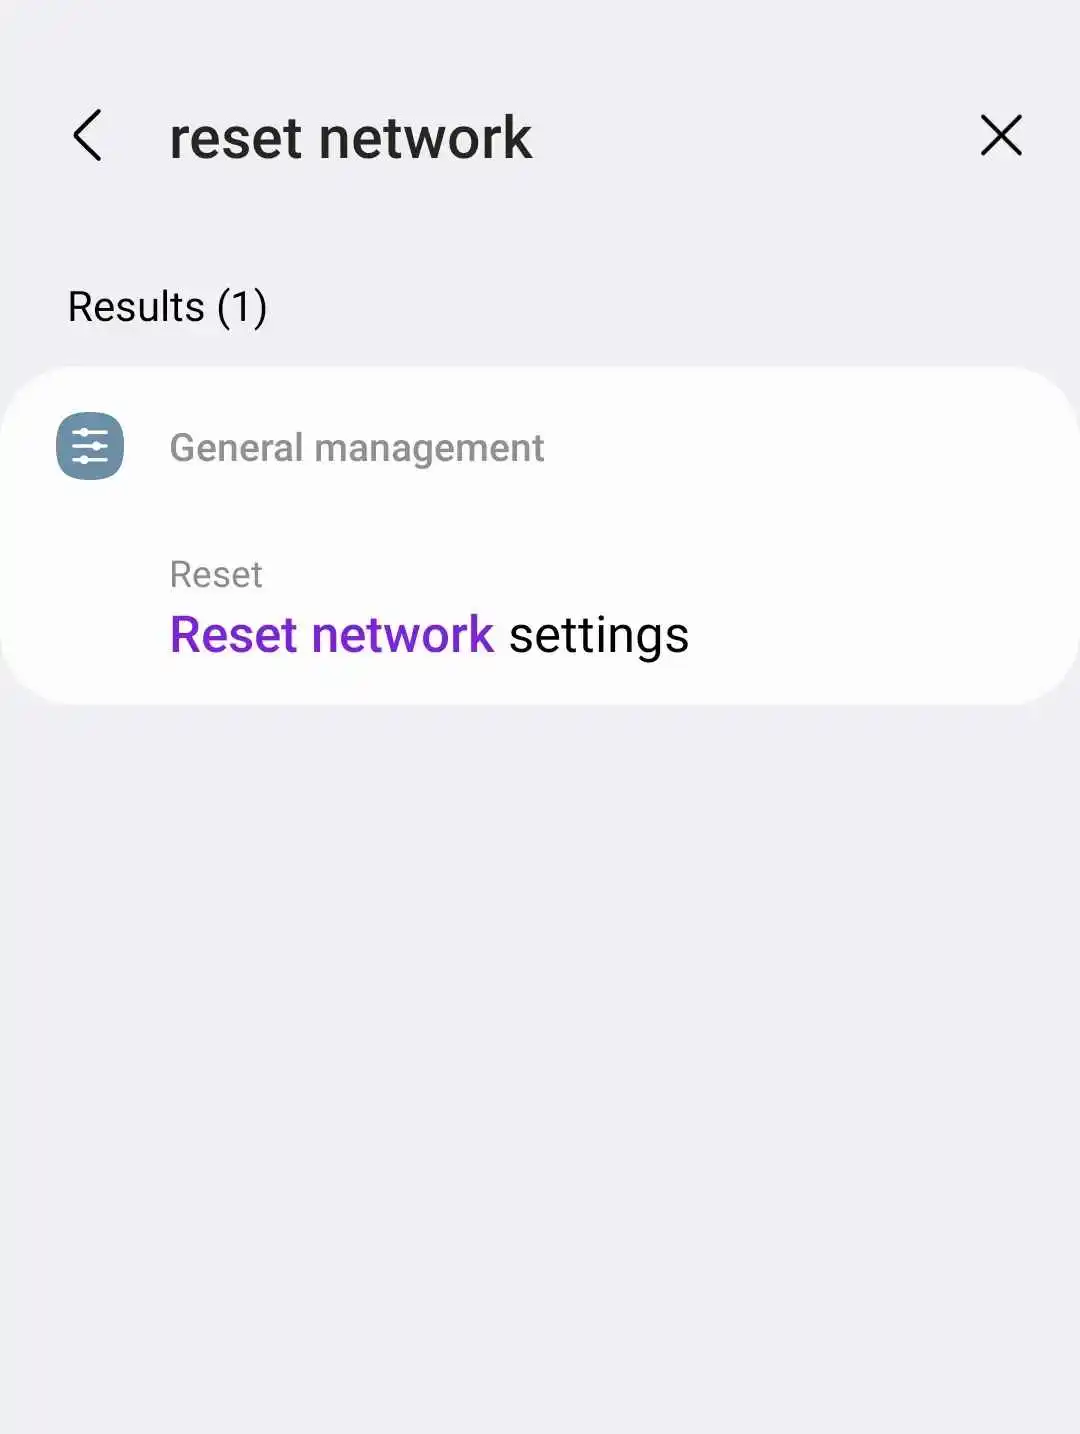 When reset network settings searched on the mobile settings